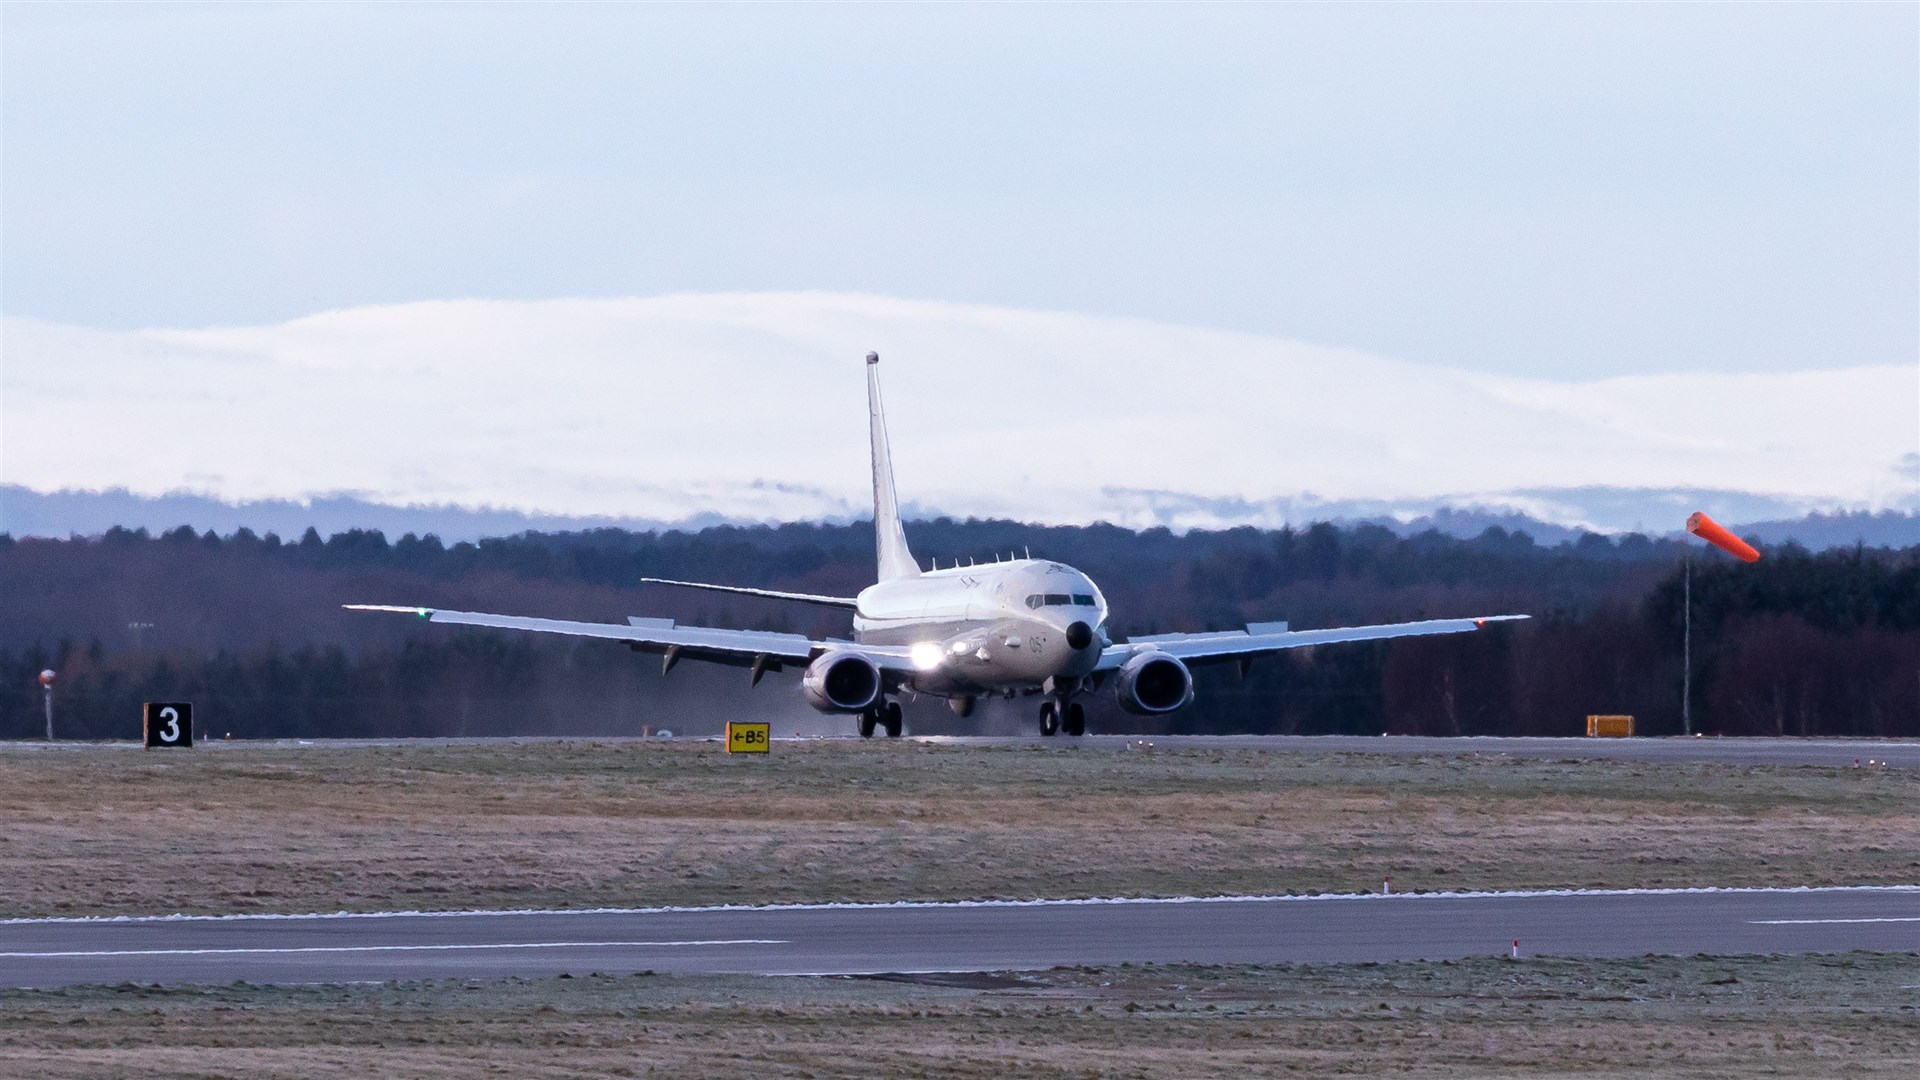 Arrival of P-8 aircraft ZP805 to RAF Lossiemouth this morning.